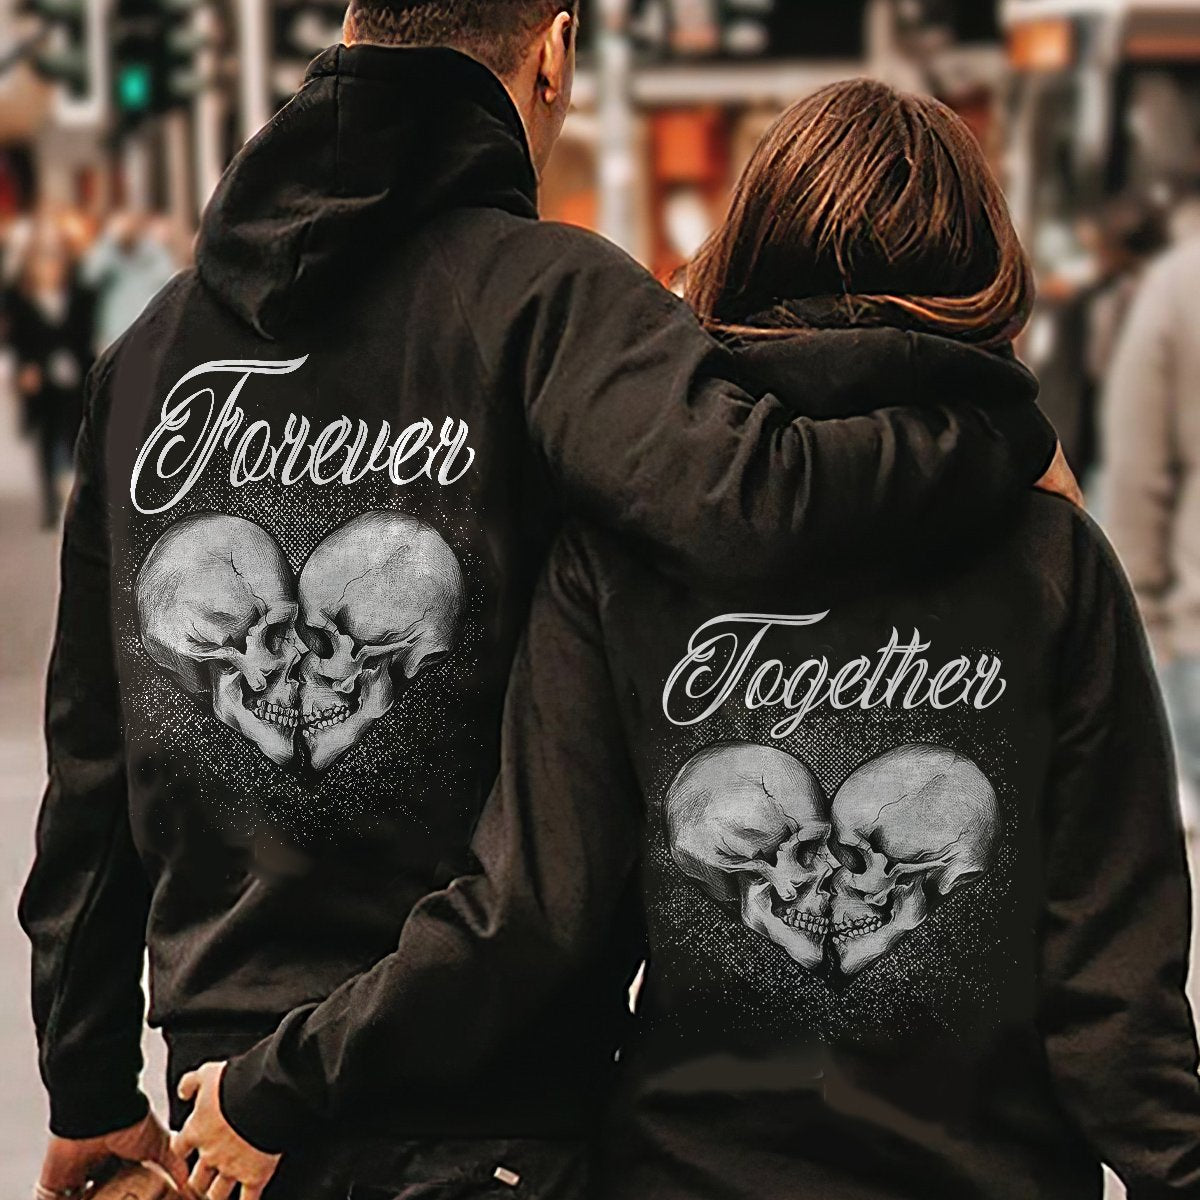 Forever Together Unisex T-shirt Hoodie Sweatshirt Plus Size S-5xl